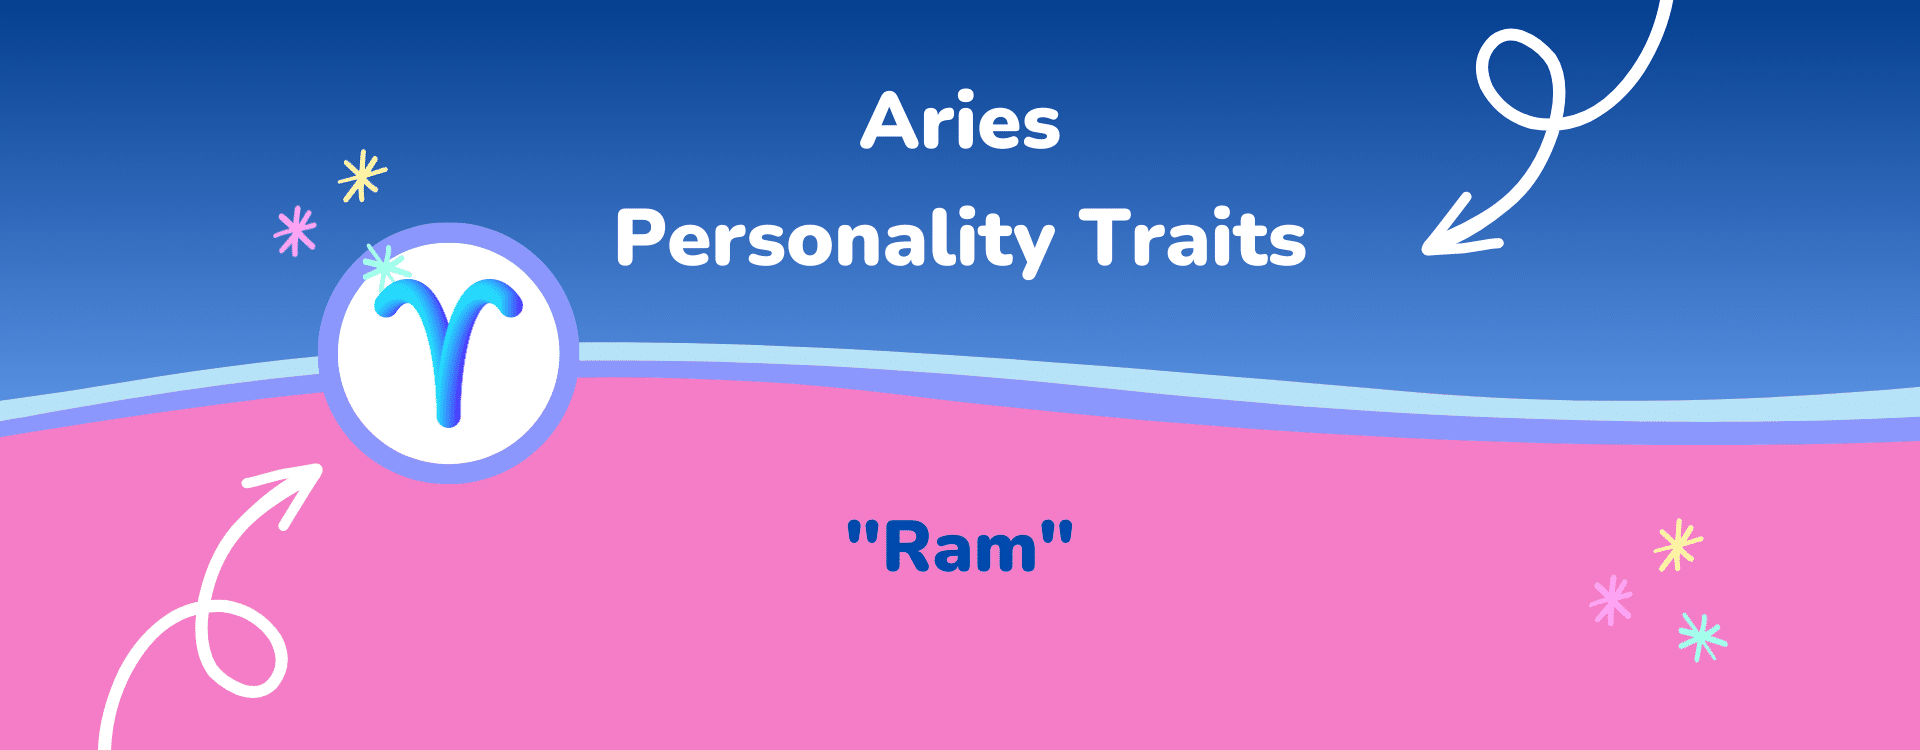 aries personality traits